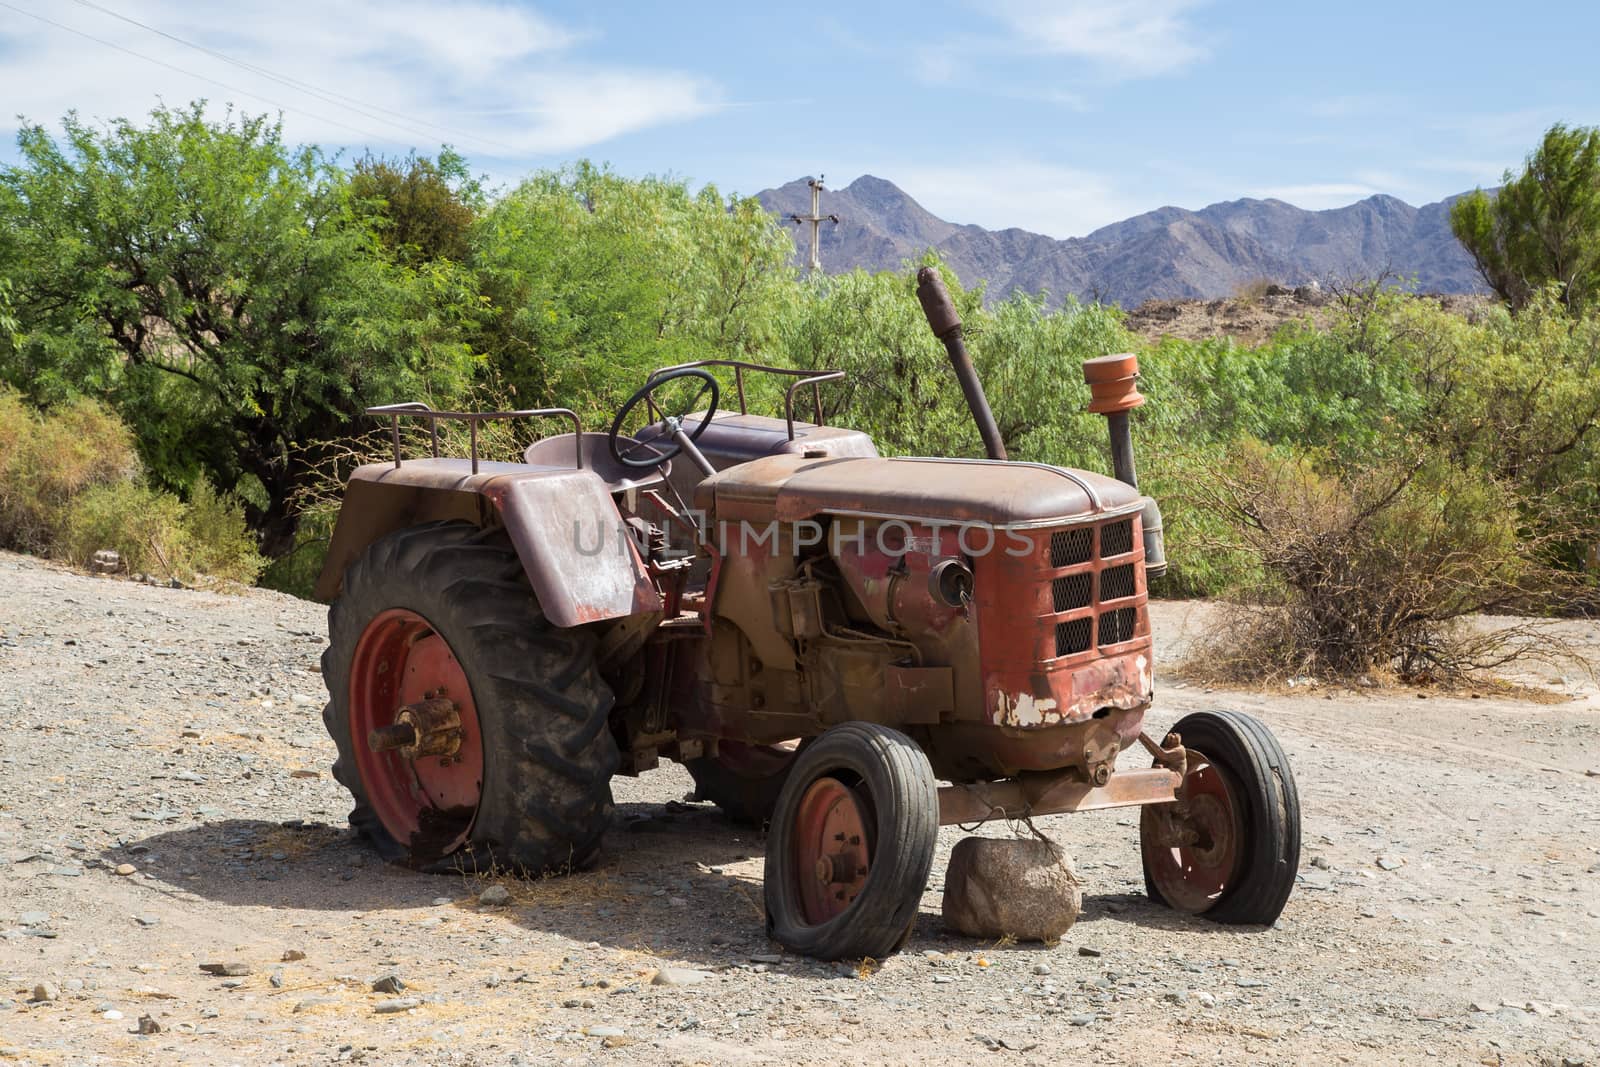 Photograph of an abandoned rusty tractor in Argentina.